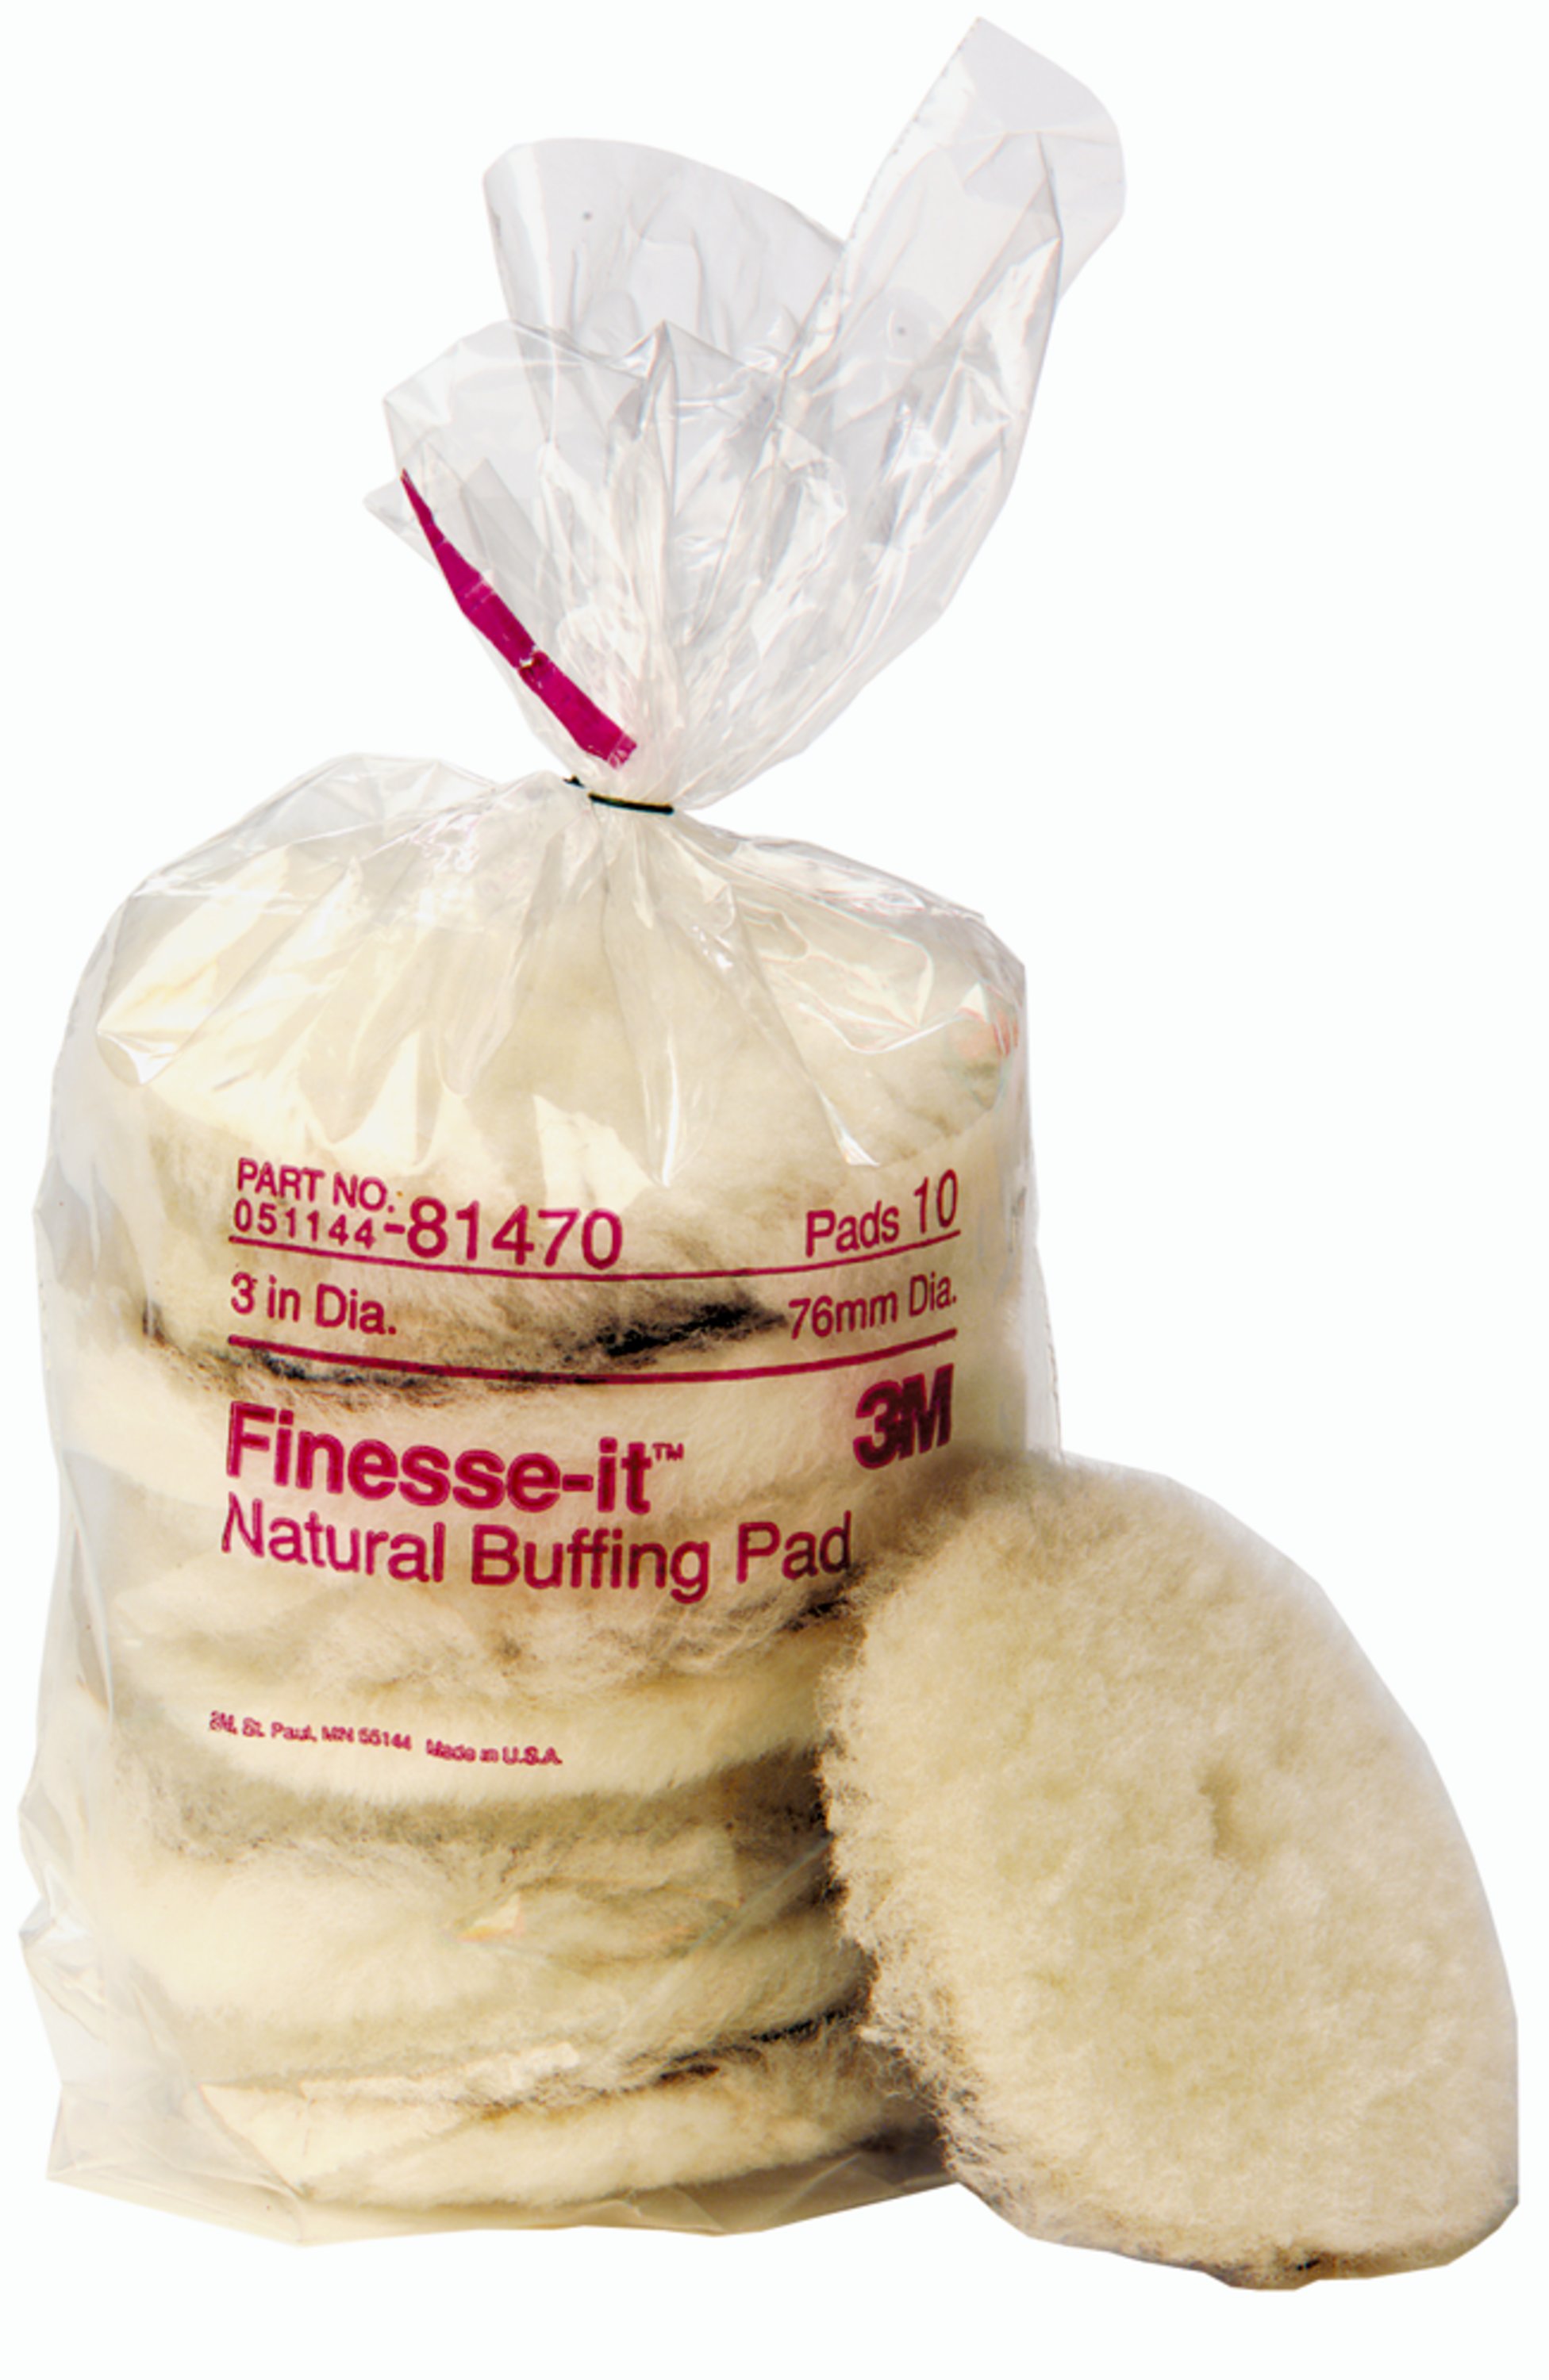 3M™ Finesse-it™ Natural Buffing Pad